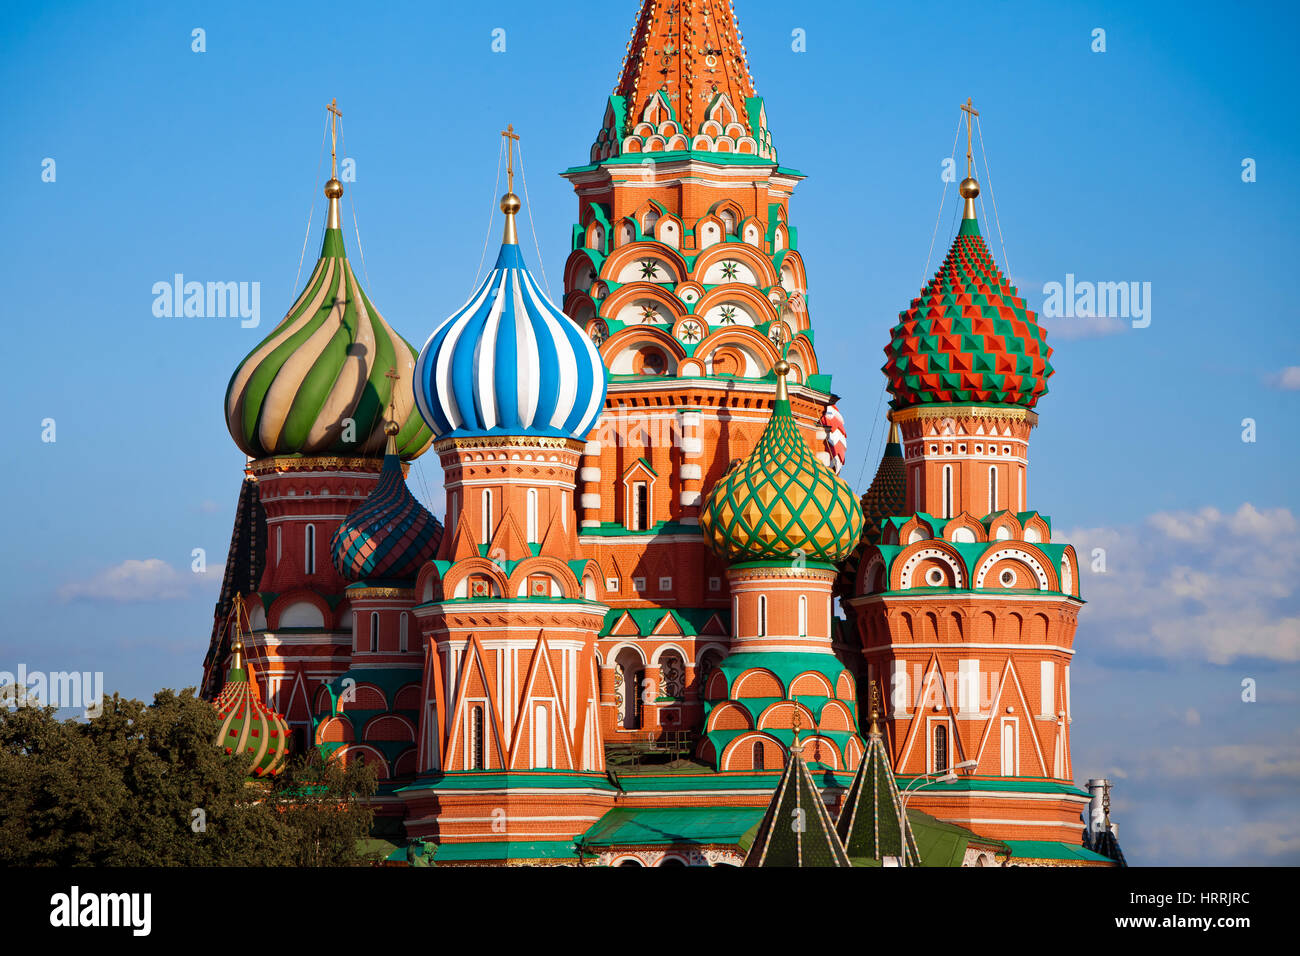 St. Basil's Pokrovsky Cathedral on the red square in Moscow, Russia Stock Photo